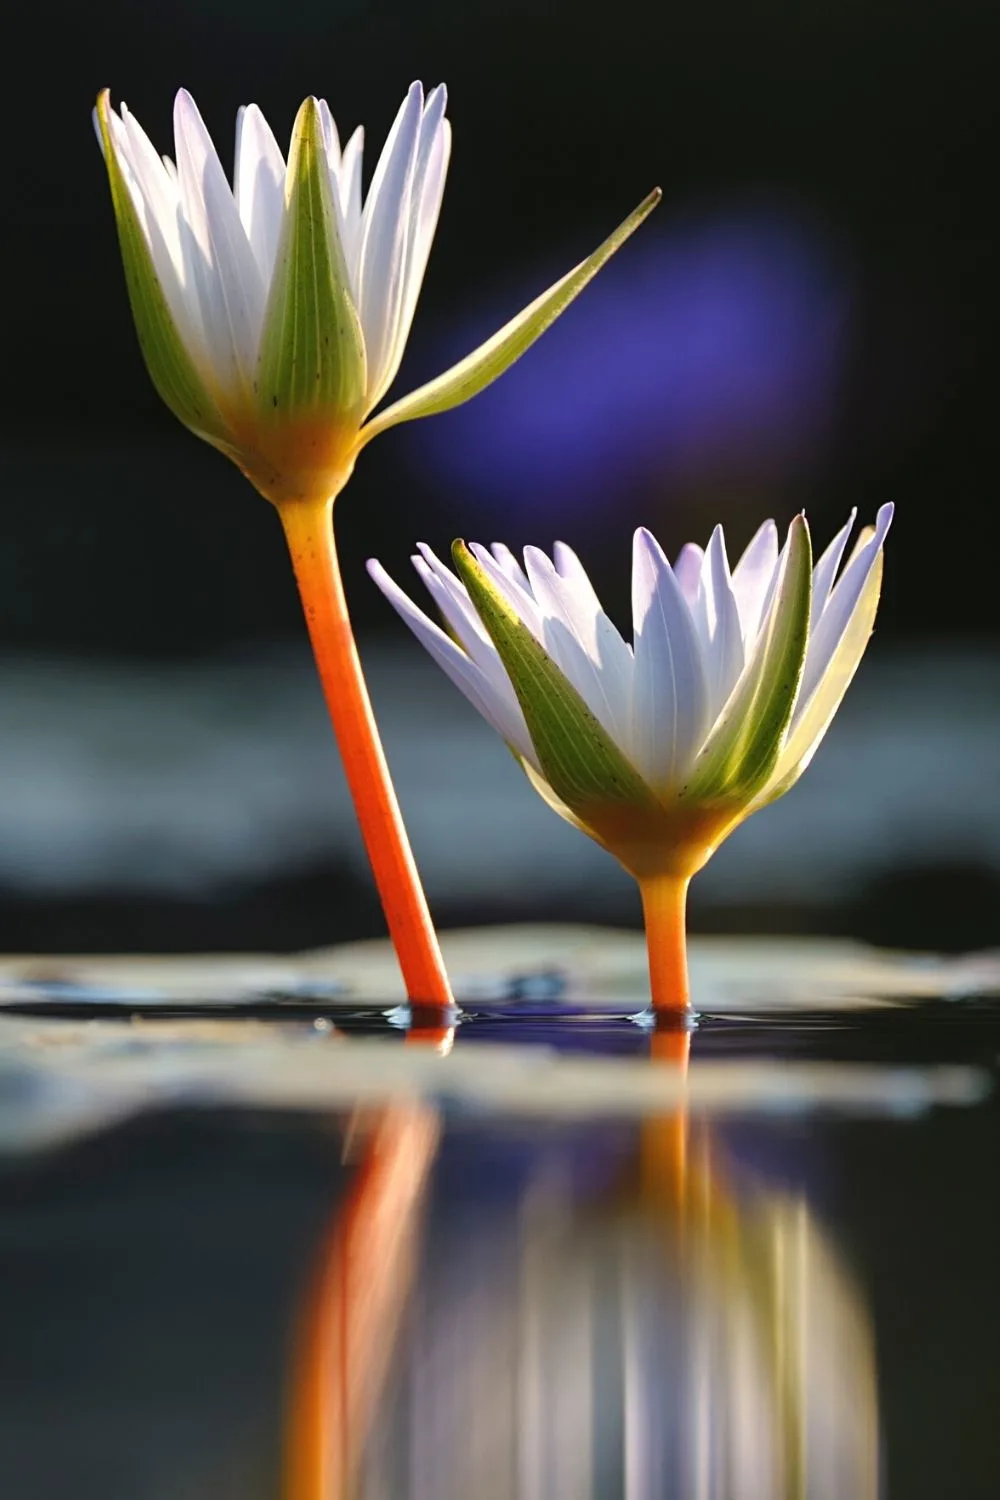 Water Lily is best placed in ponds, indoor water decor, fountains, and the like